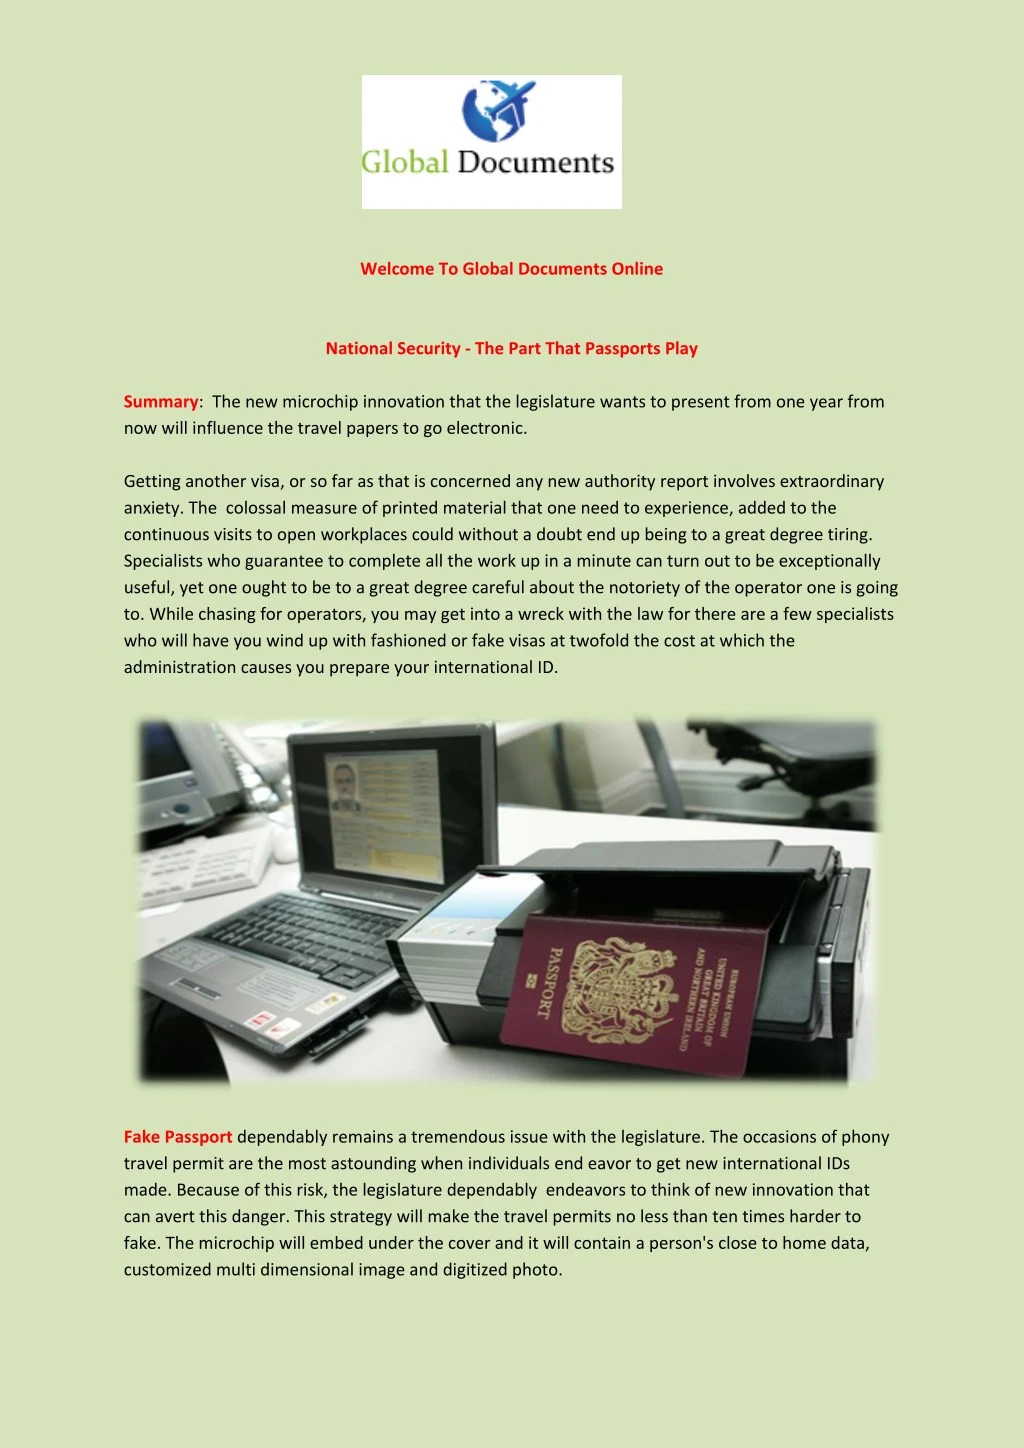 welcome to global documents online